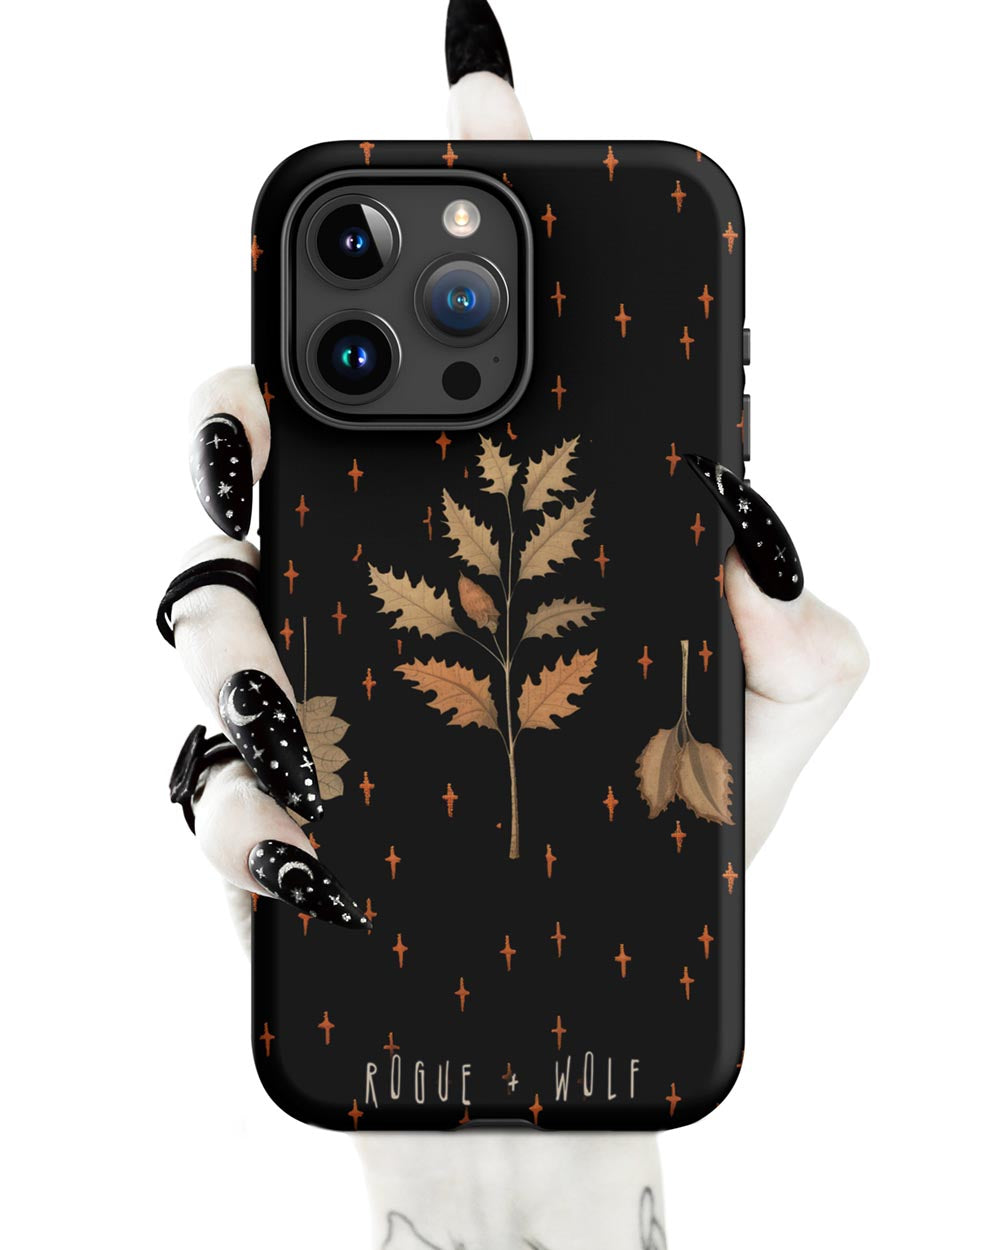 Autumn Memoir Tough Phone Case for iPhone - Dark Academia Anti-Scratch Shockproof Botanical Cover, Witchy Goth Accessories, Christmas Gifts